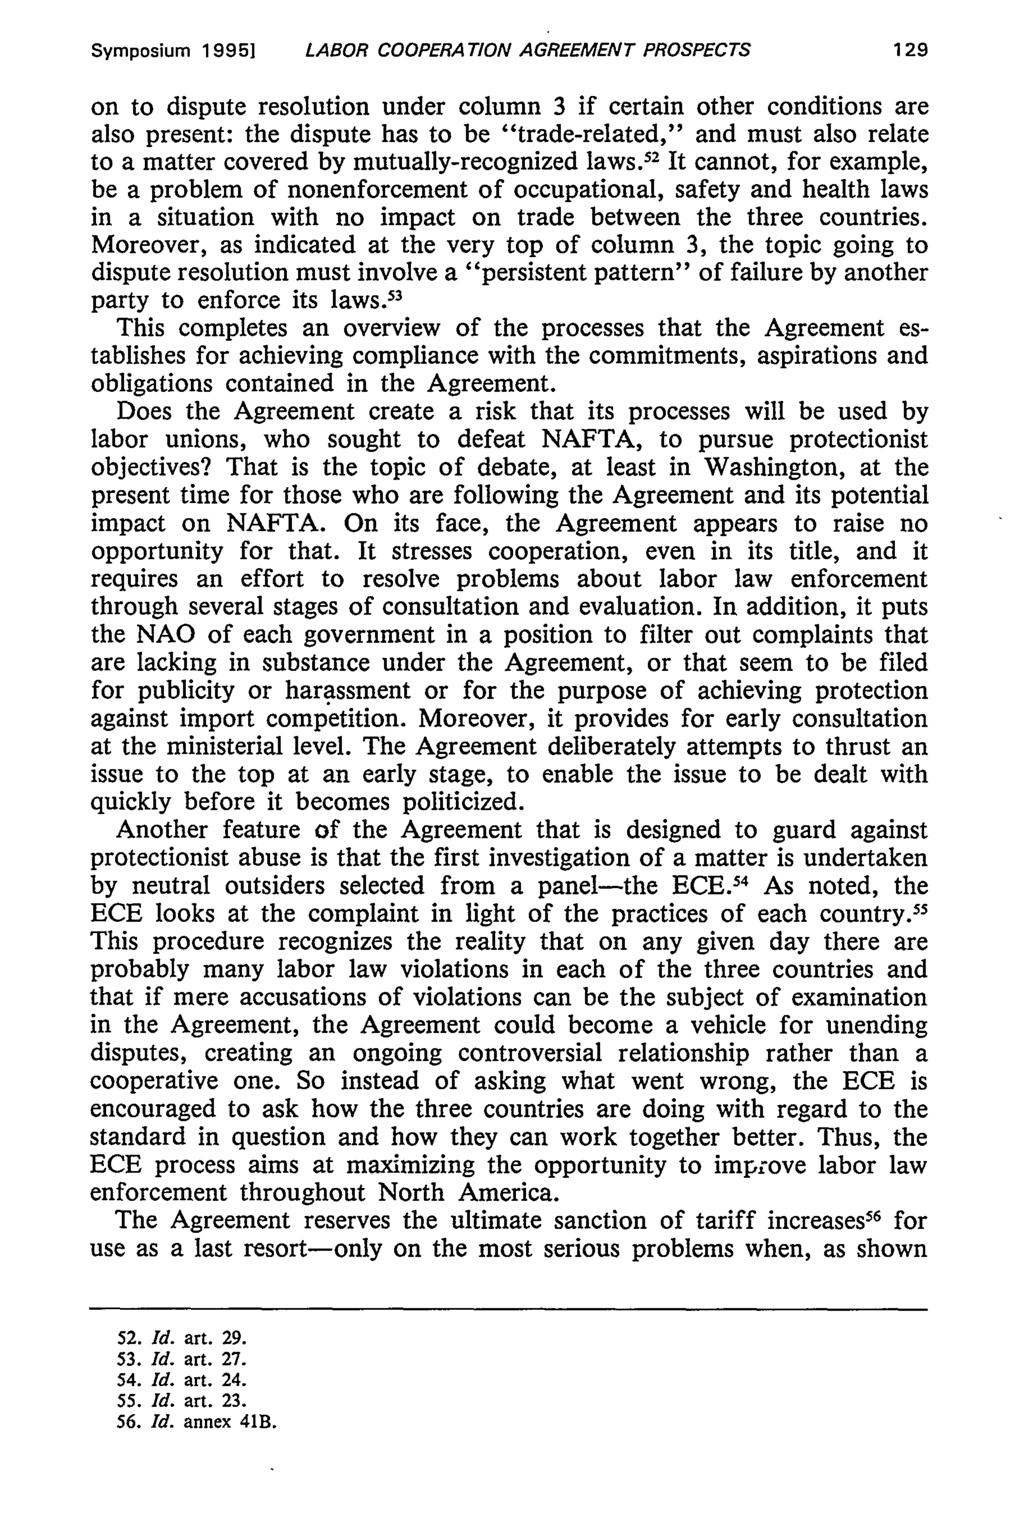 Symposium 1995] LABOR COOPERATION AGREEMENT PROSPECTS on to dispute resolution under column 3 if certain other conditions are also present: the dispute has to be "trade-related," and must also relate